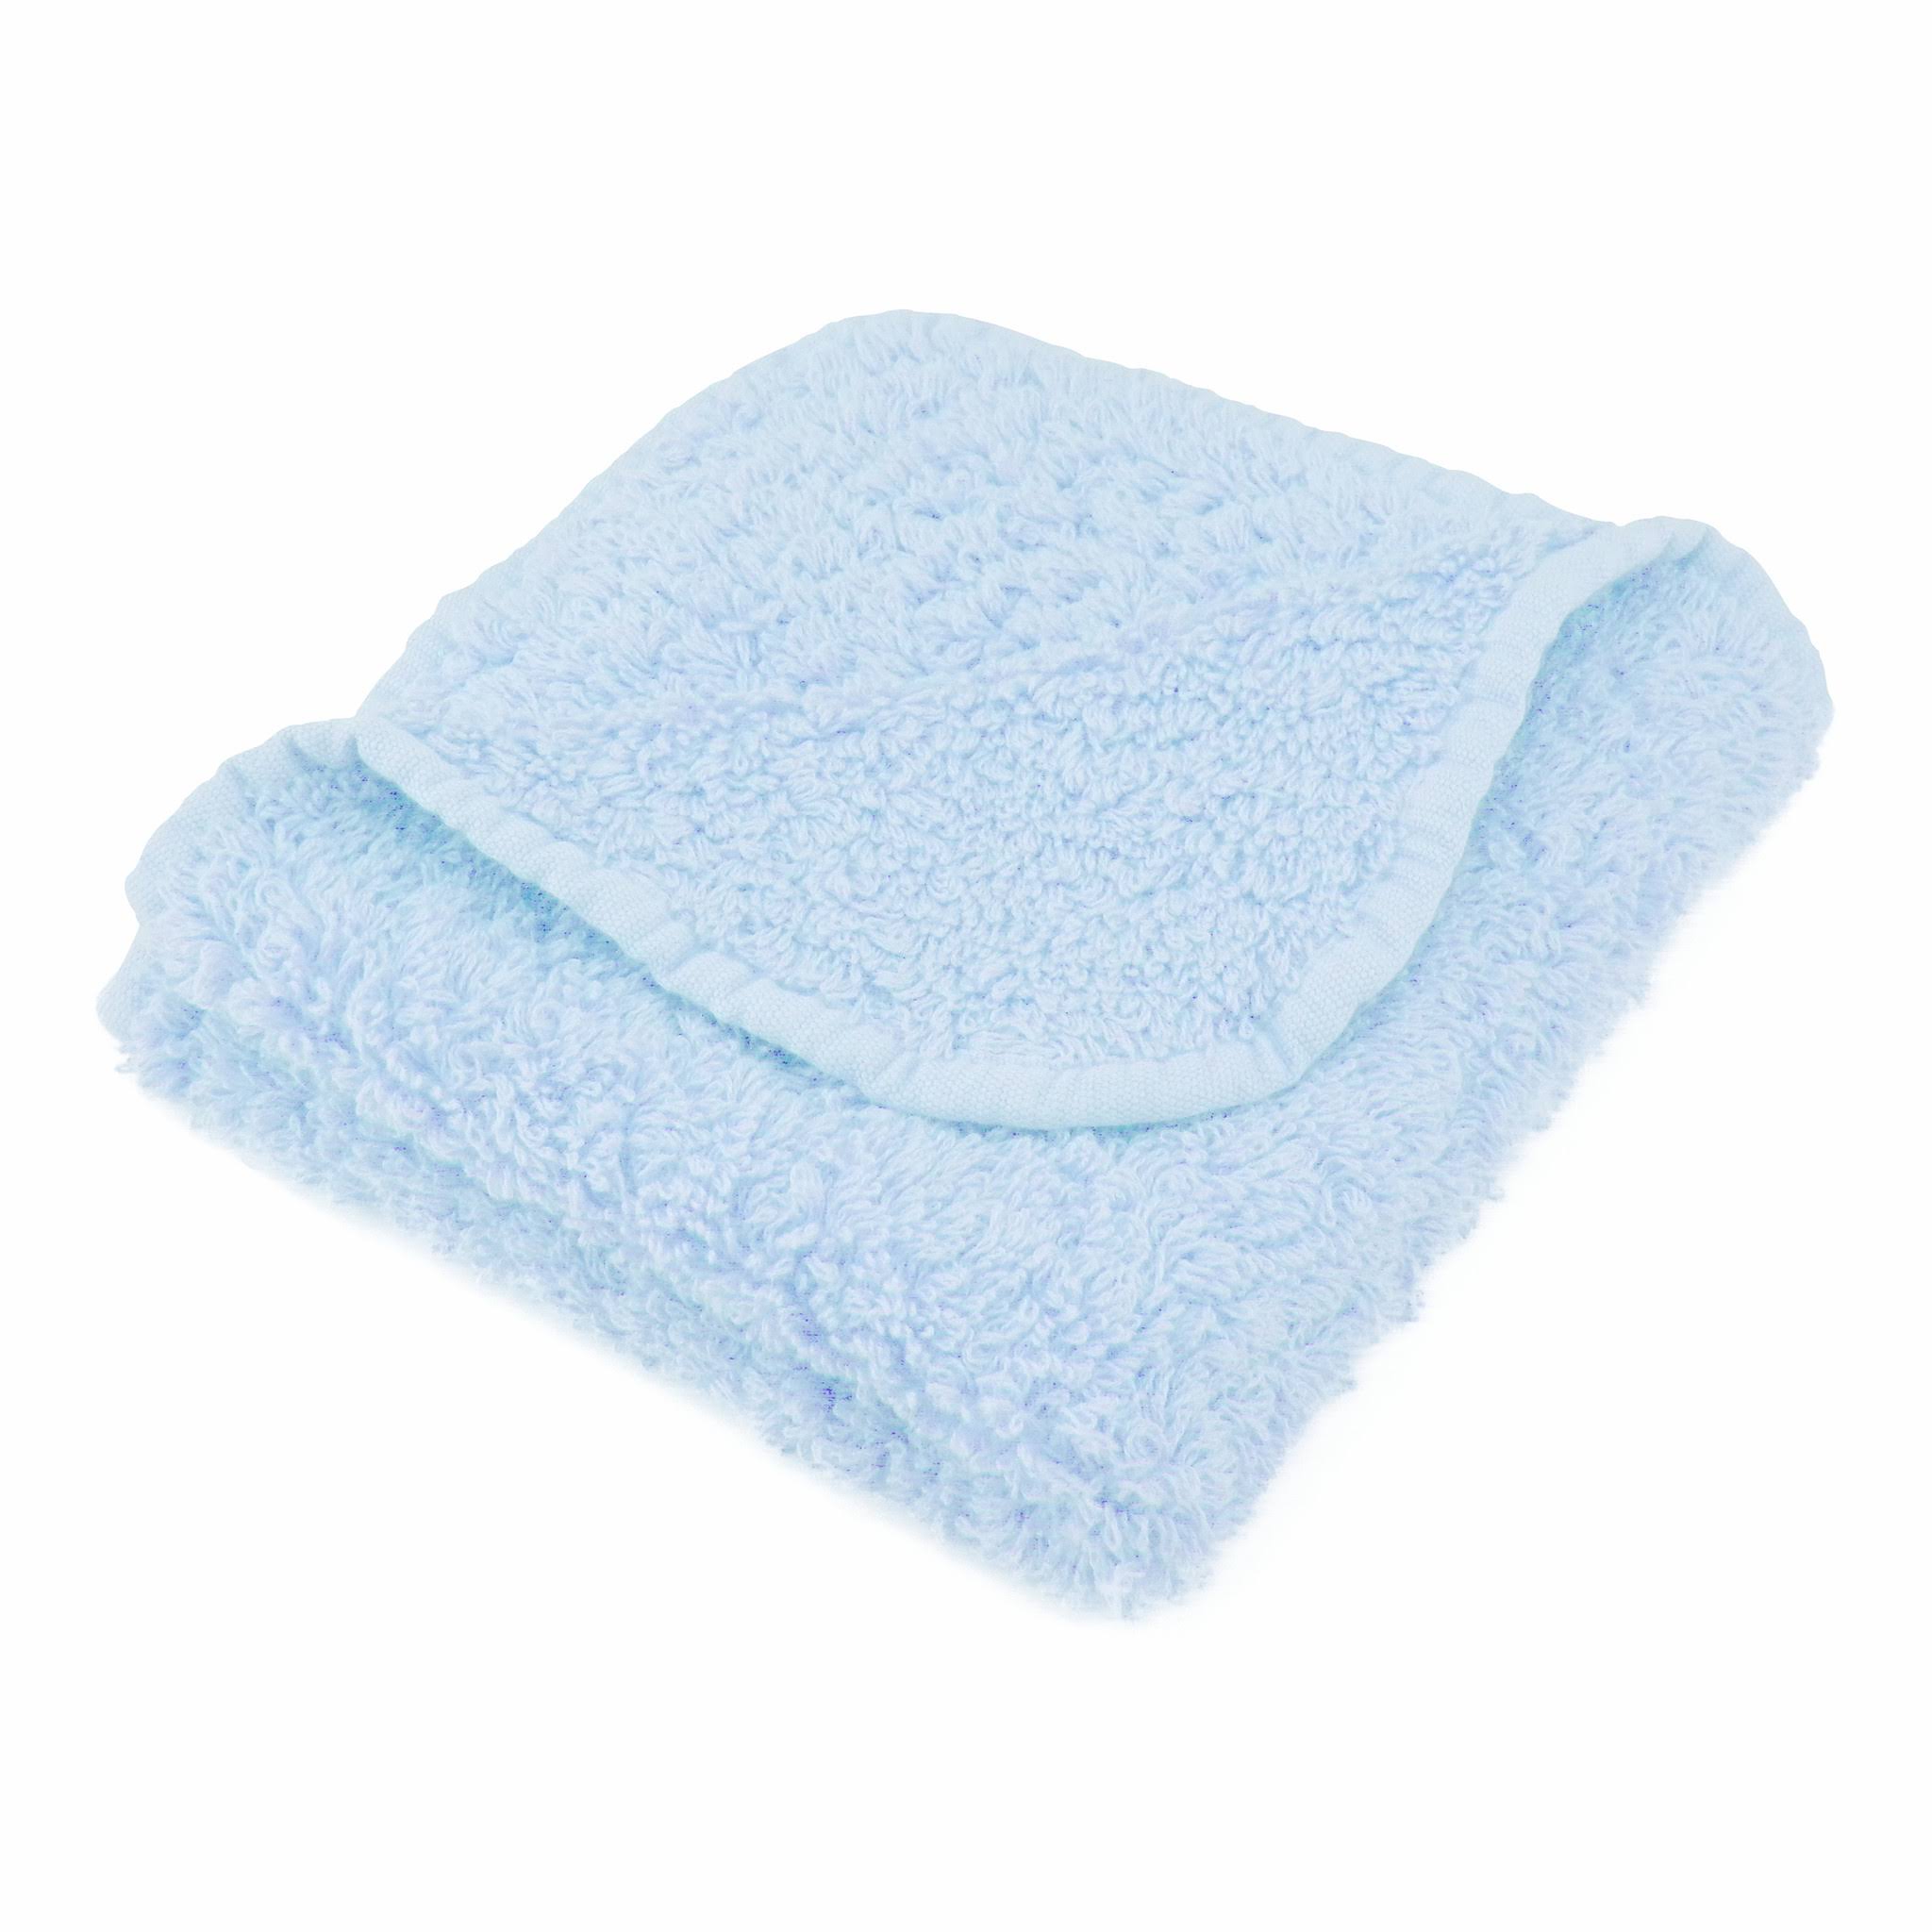 Abyss Super Pile Towels - Hand Towel 17x30" Powder Blue 330